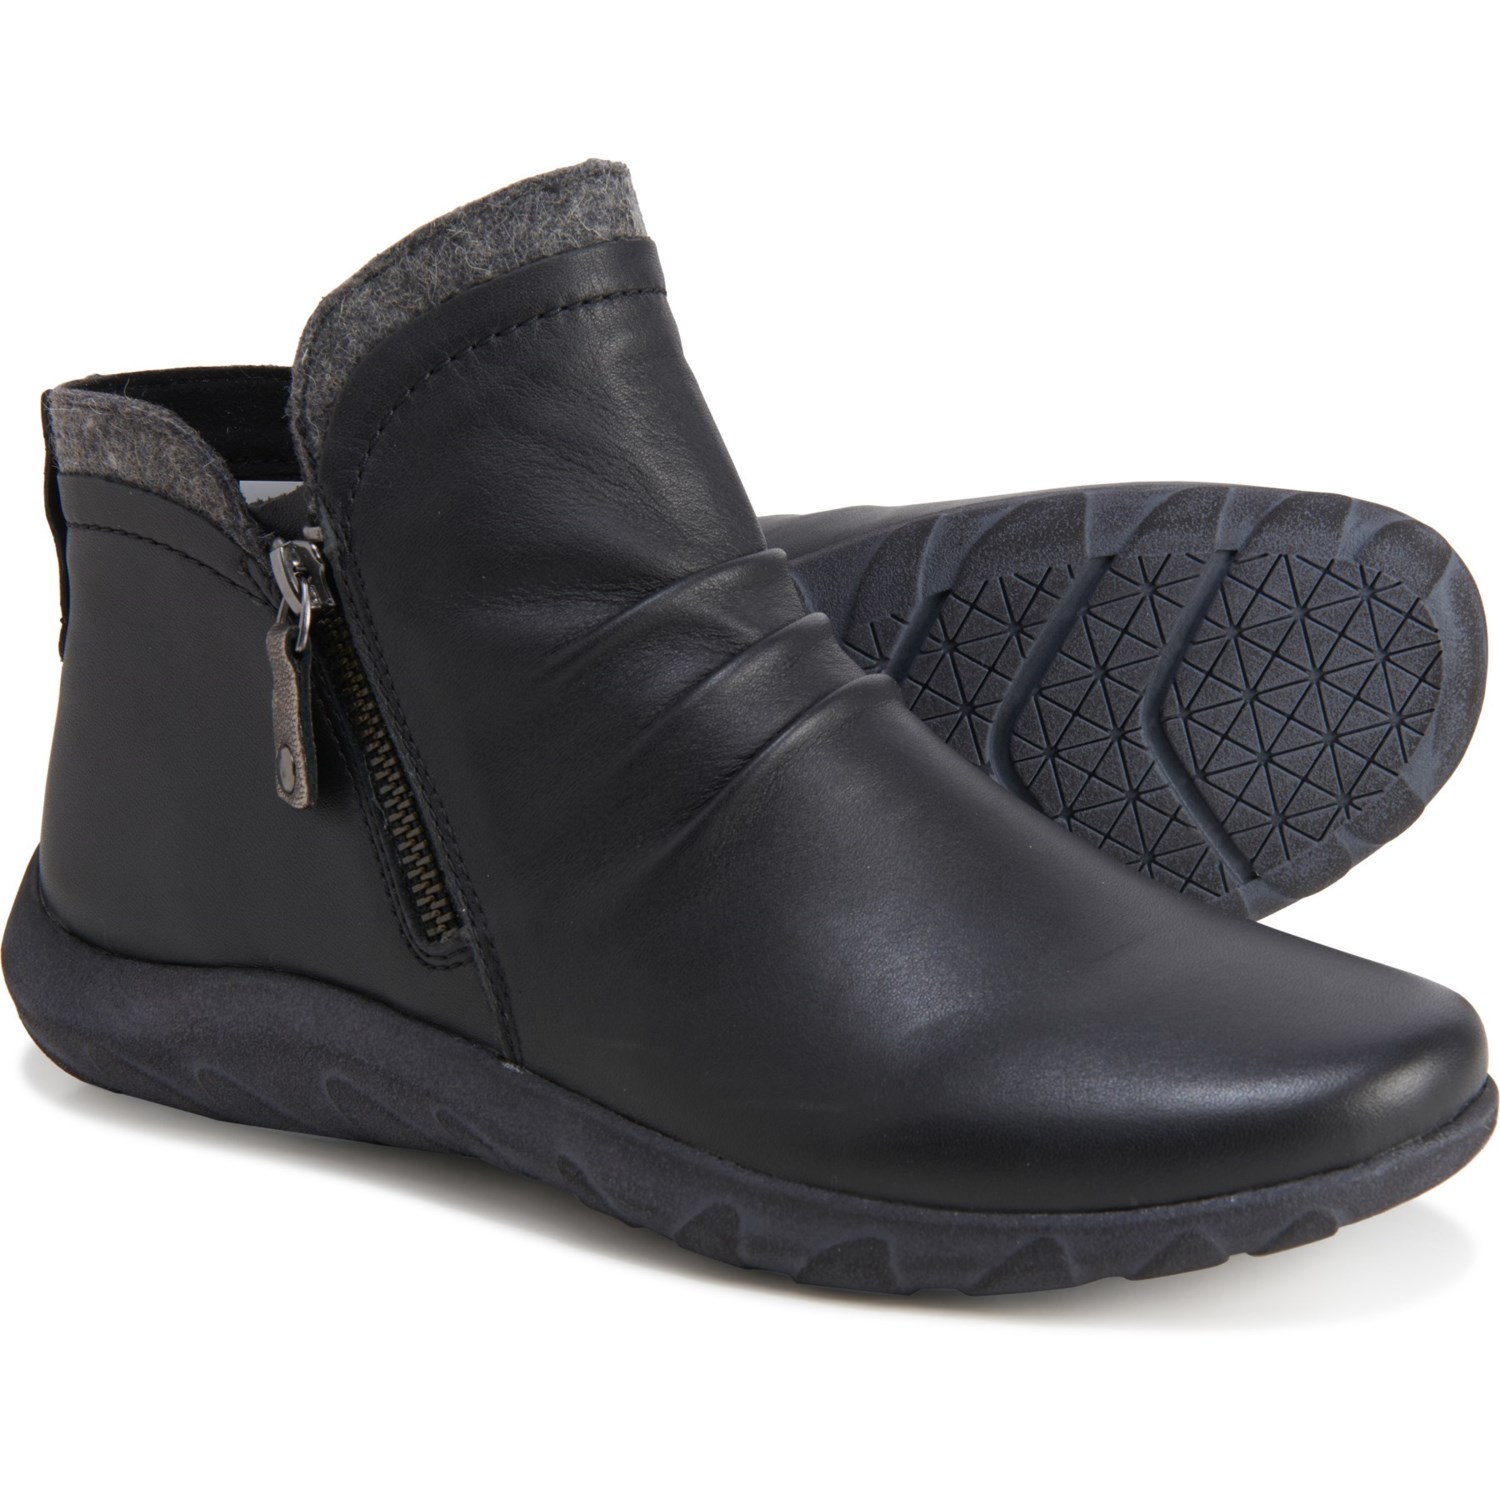 rockport cobb hill boots on sale